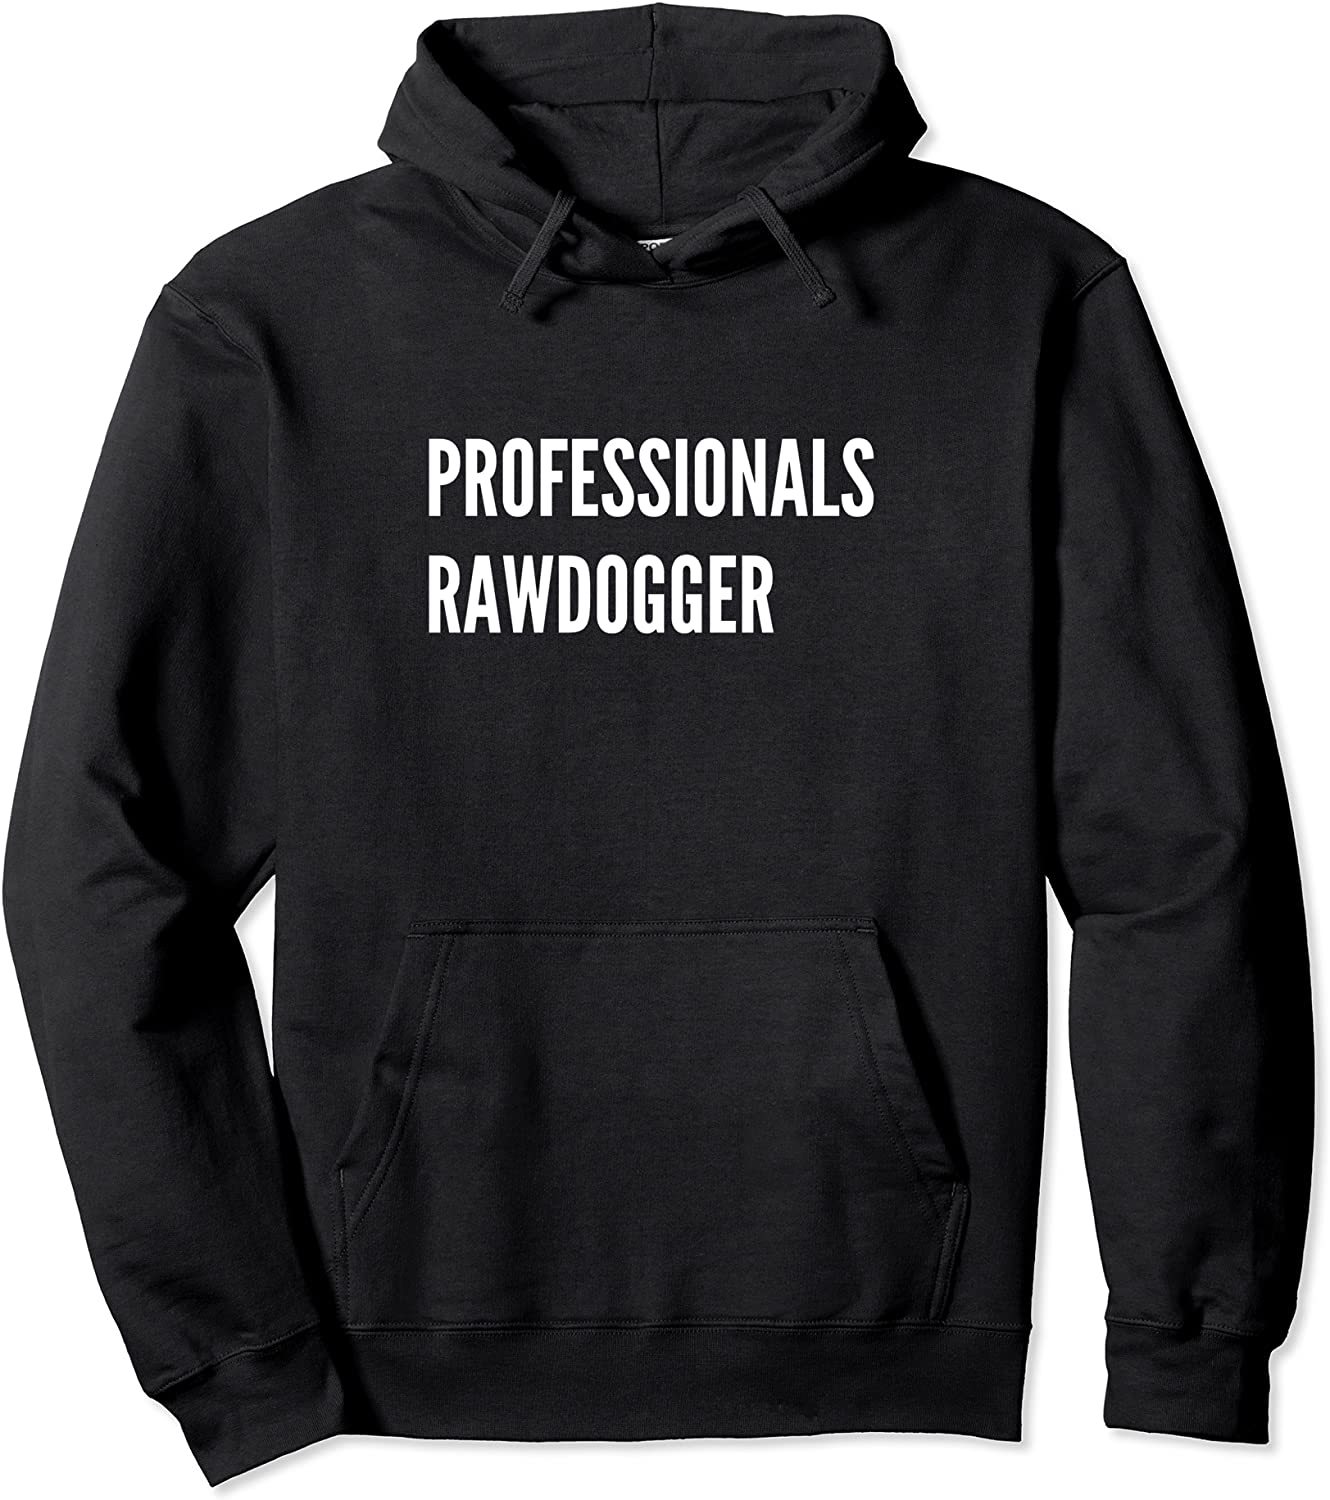 Classic Black With White Letter Jidion Hoodie, PROFESSIONALS RAWDOGGER CLASSIC Pullover Hoodie#1